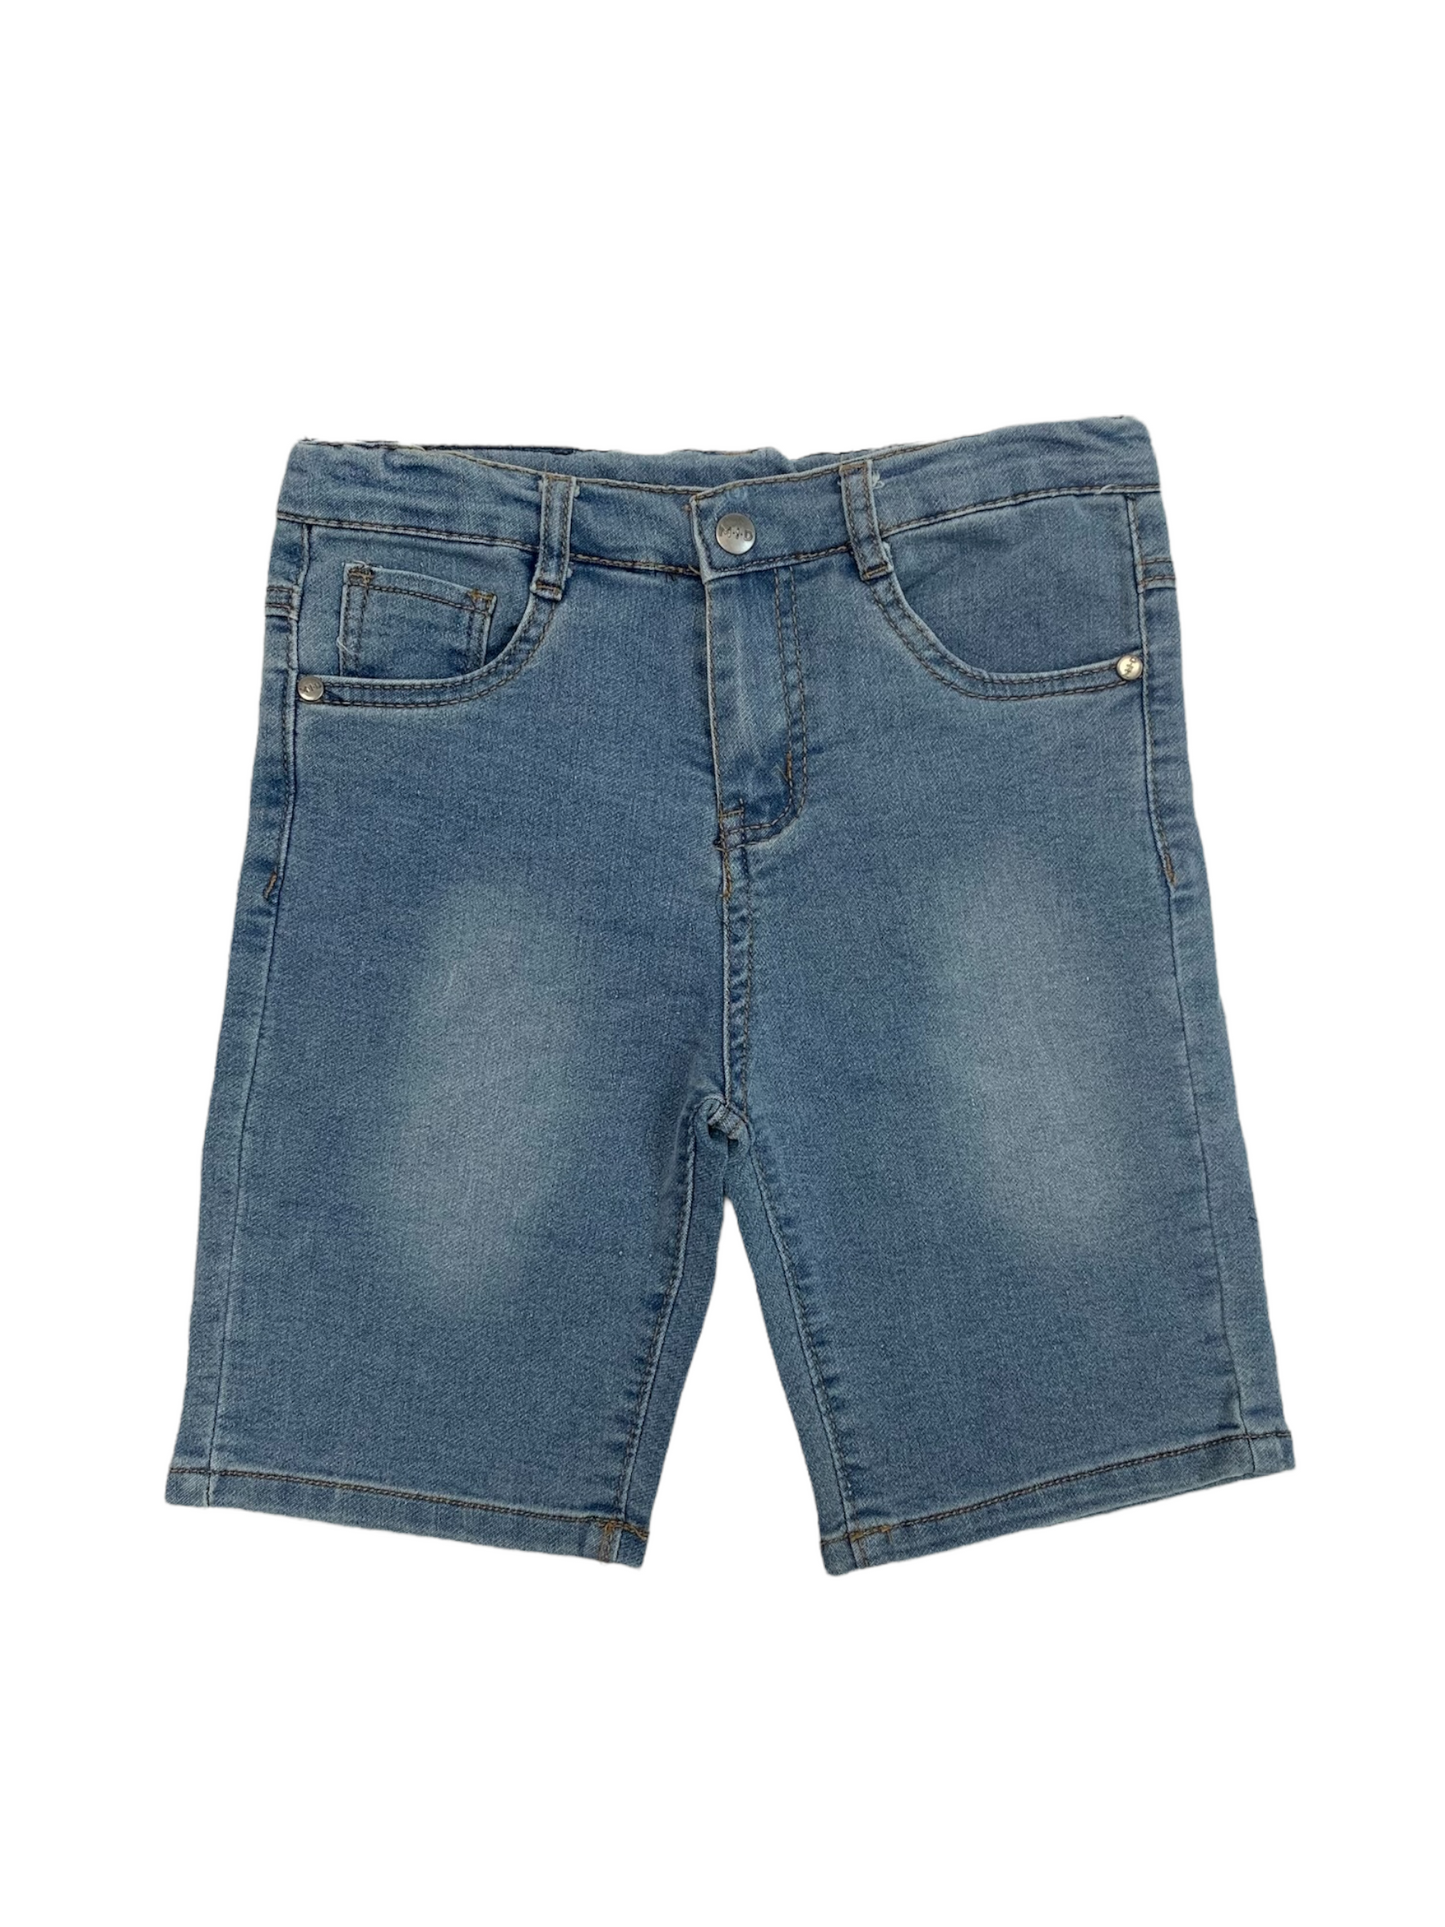 Pale blue MID Bermuda shorts for boys 7 to 14 years old